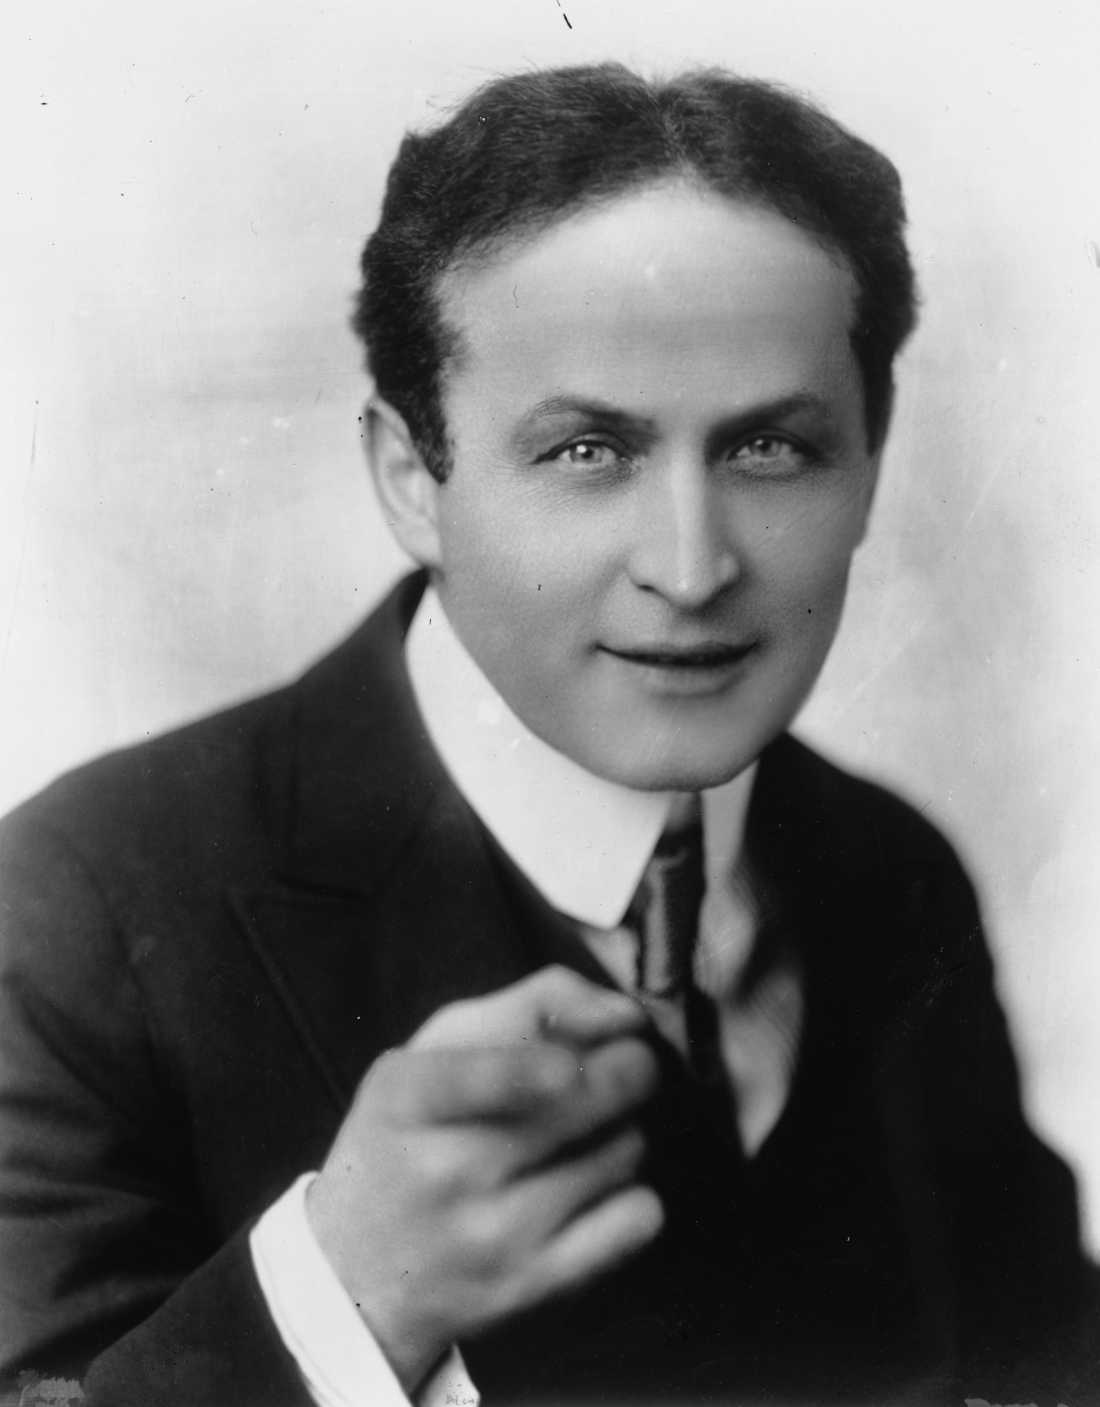 The Official Sid Radner Houdini Seance is tonight at 8:15pm at The Masonic Center.